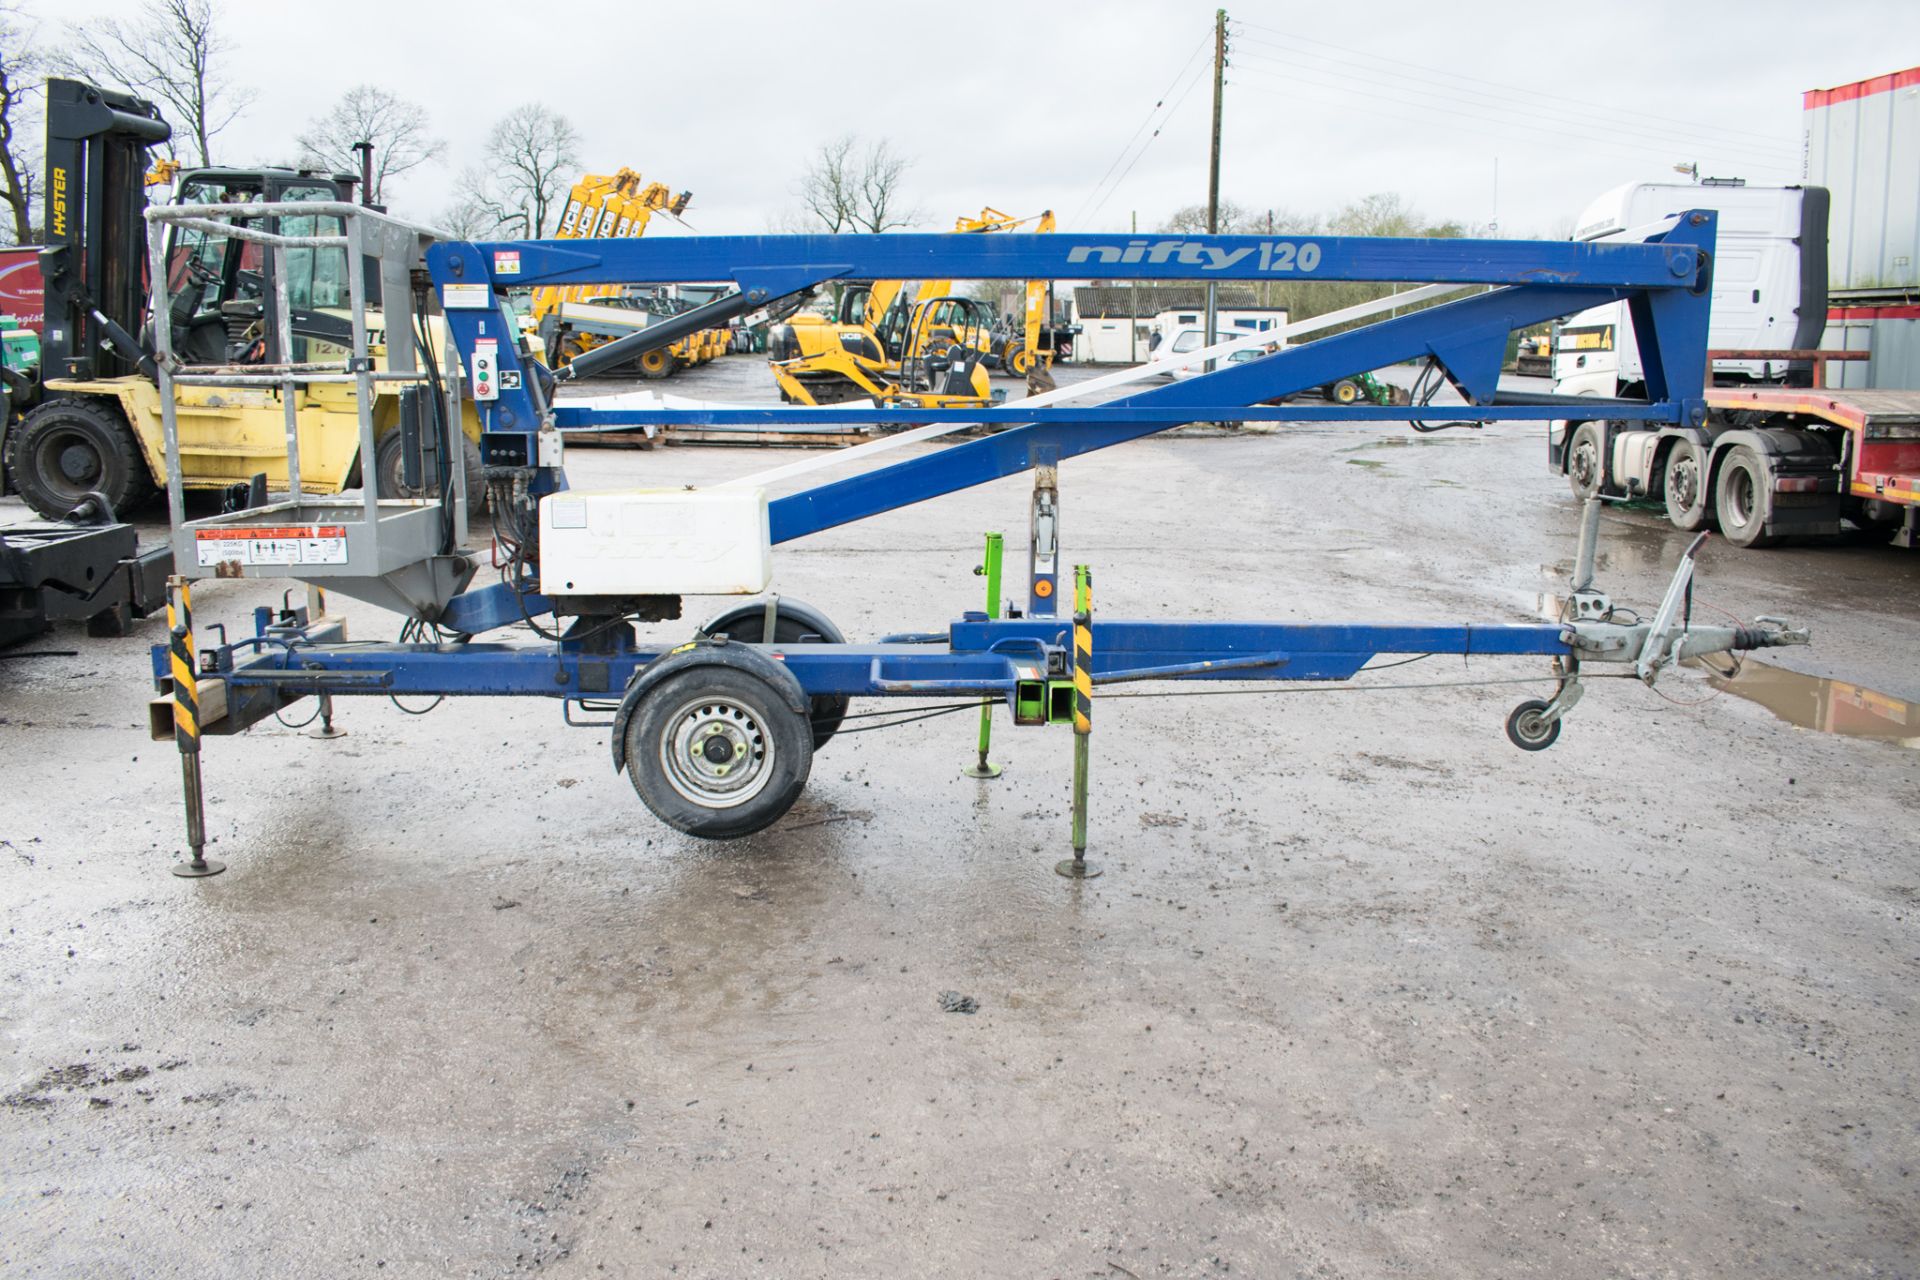 Nifty 120 ME fast tow articulated boom lift access platform Year: 2006 S/N: 015149 08660045 - Image 5 of 9